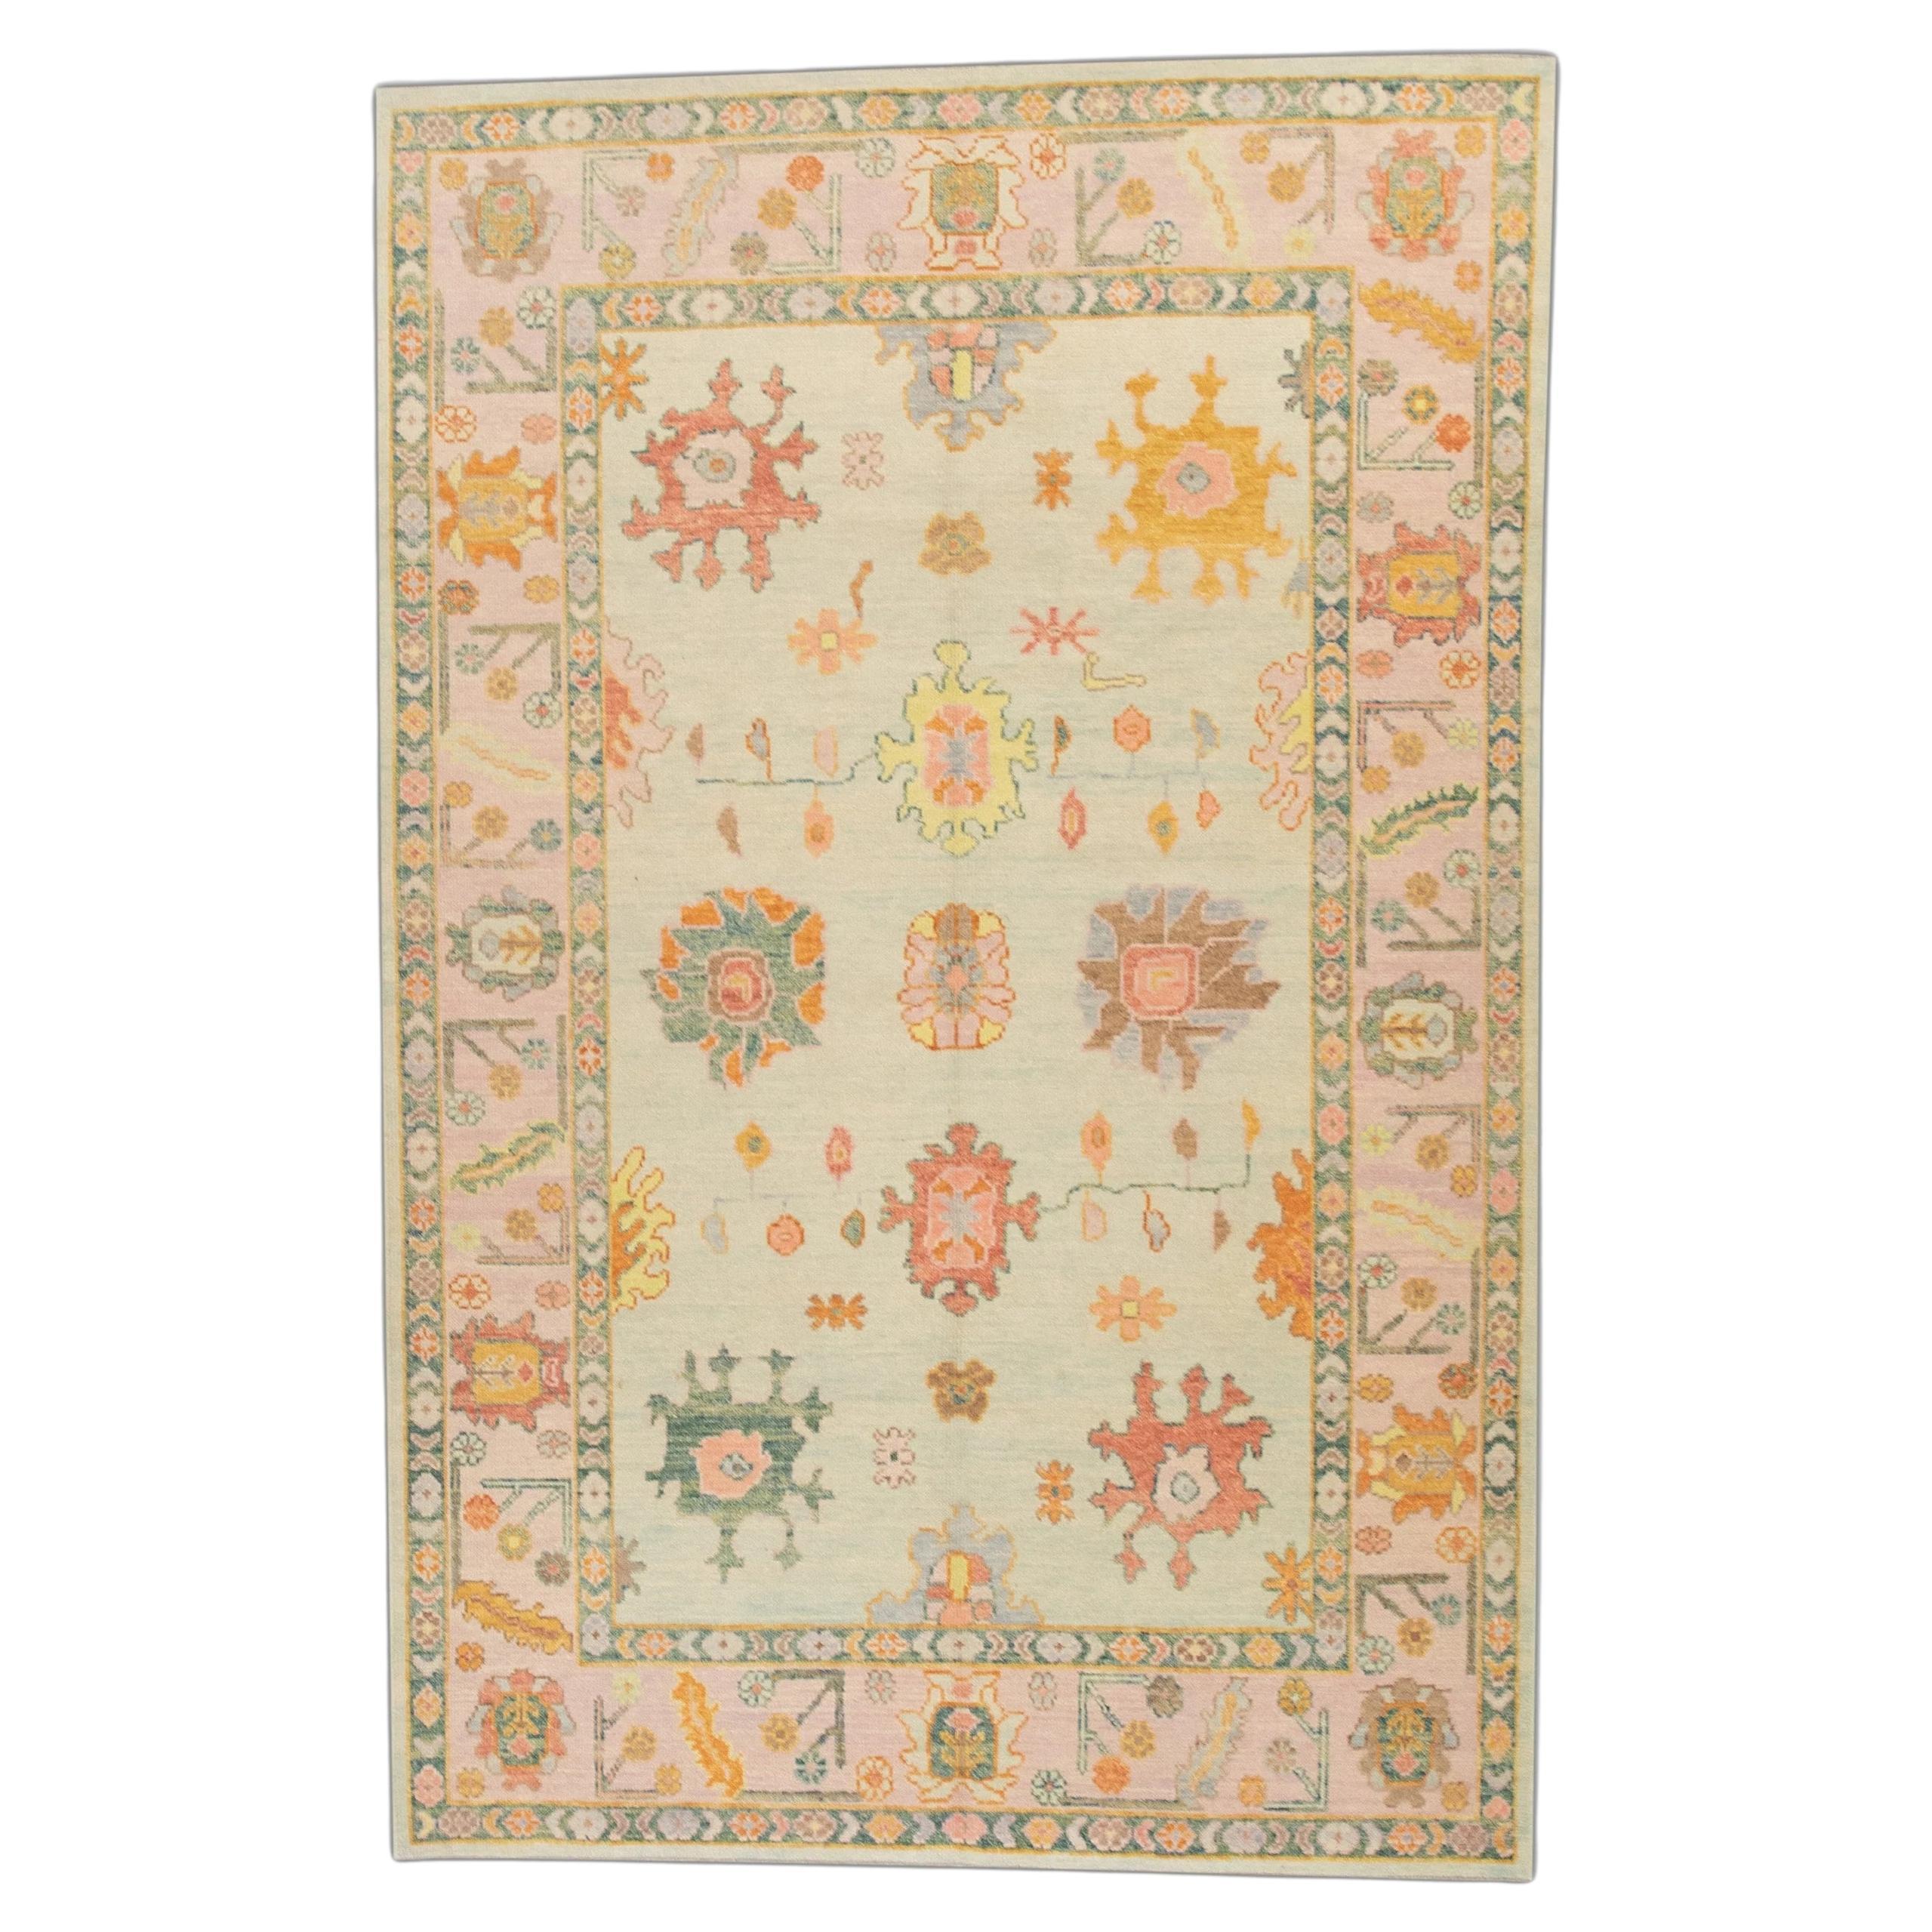 Green and Pink Floral Design Handwoven Wool Turkish Oushak Rug 6' x 9'6"